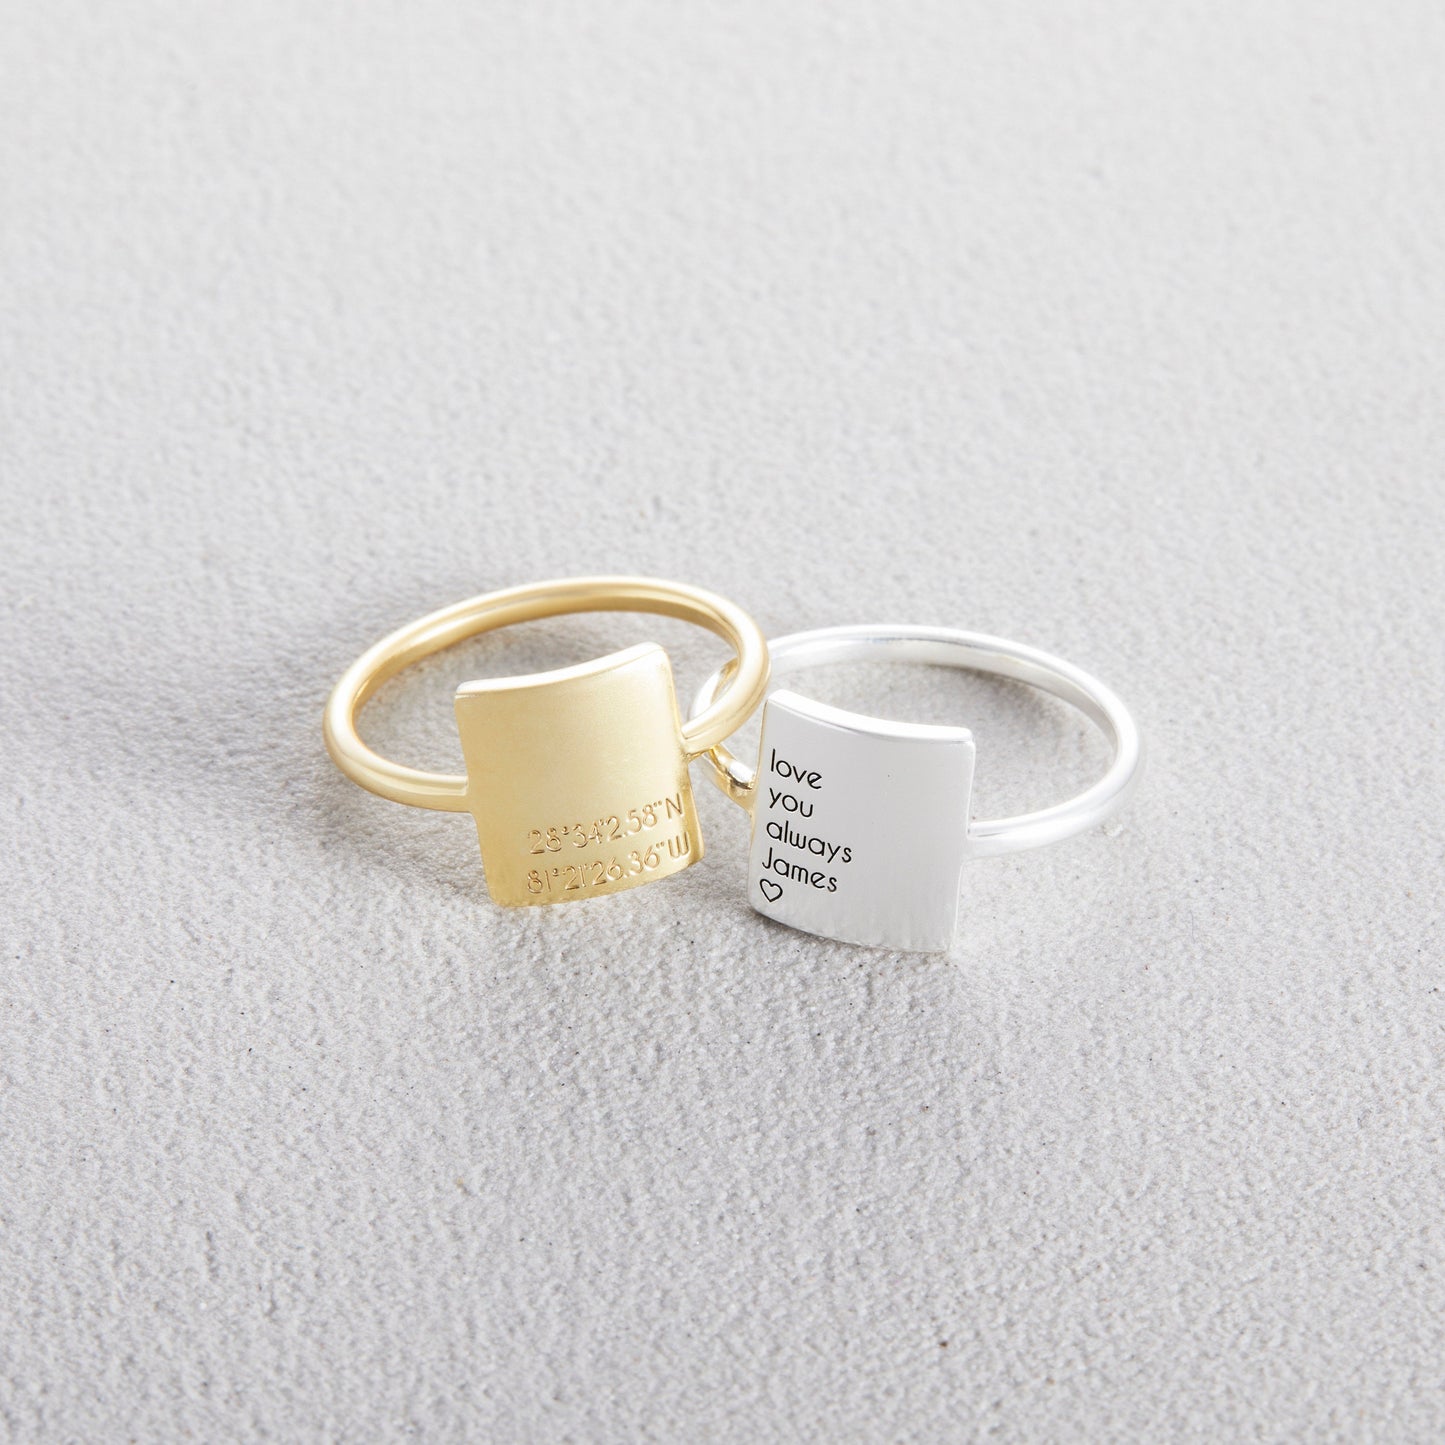 Personalized Sterling Silver Ring | Custom Dainty Ring | Everyday Statement Ring | Stacking Ring | Minimalist Stacking Ring | Engraved Ring